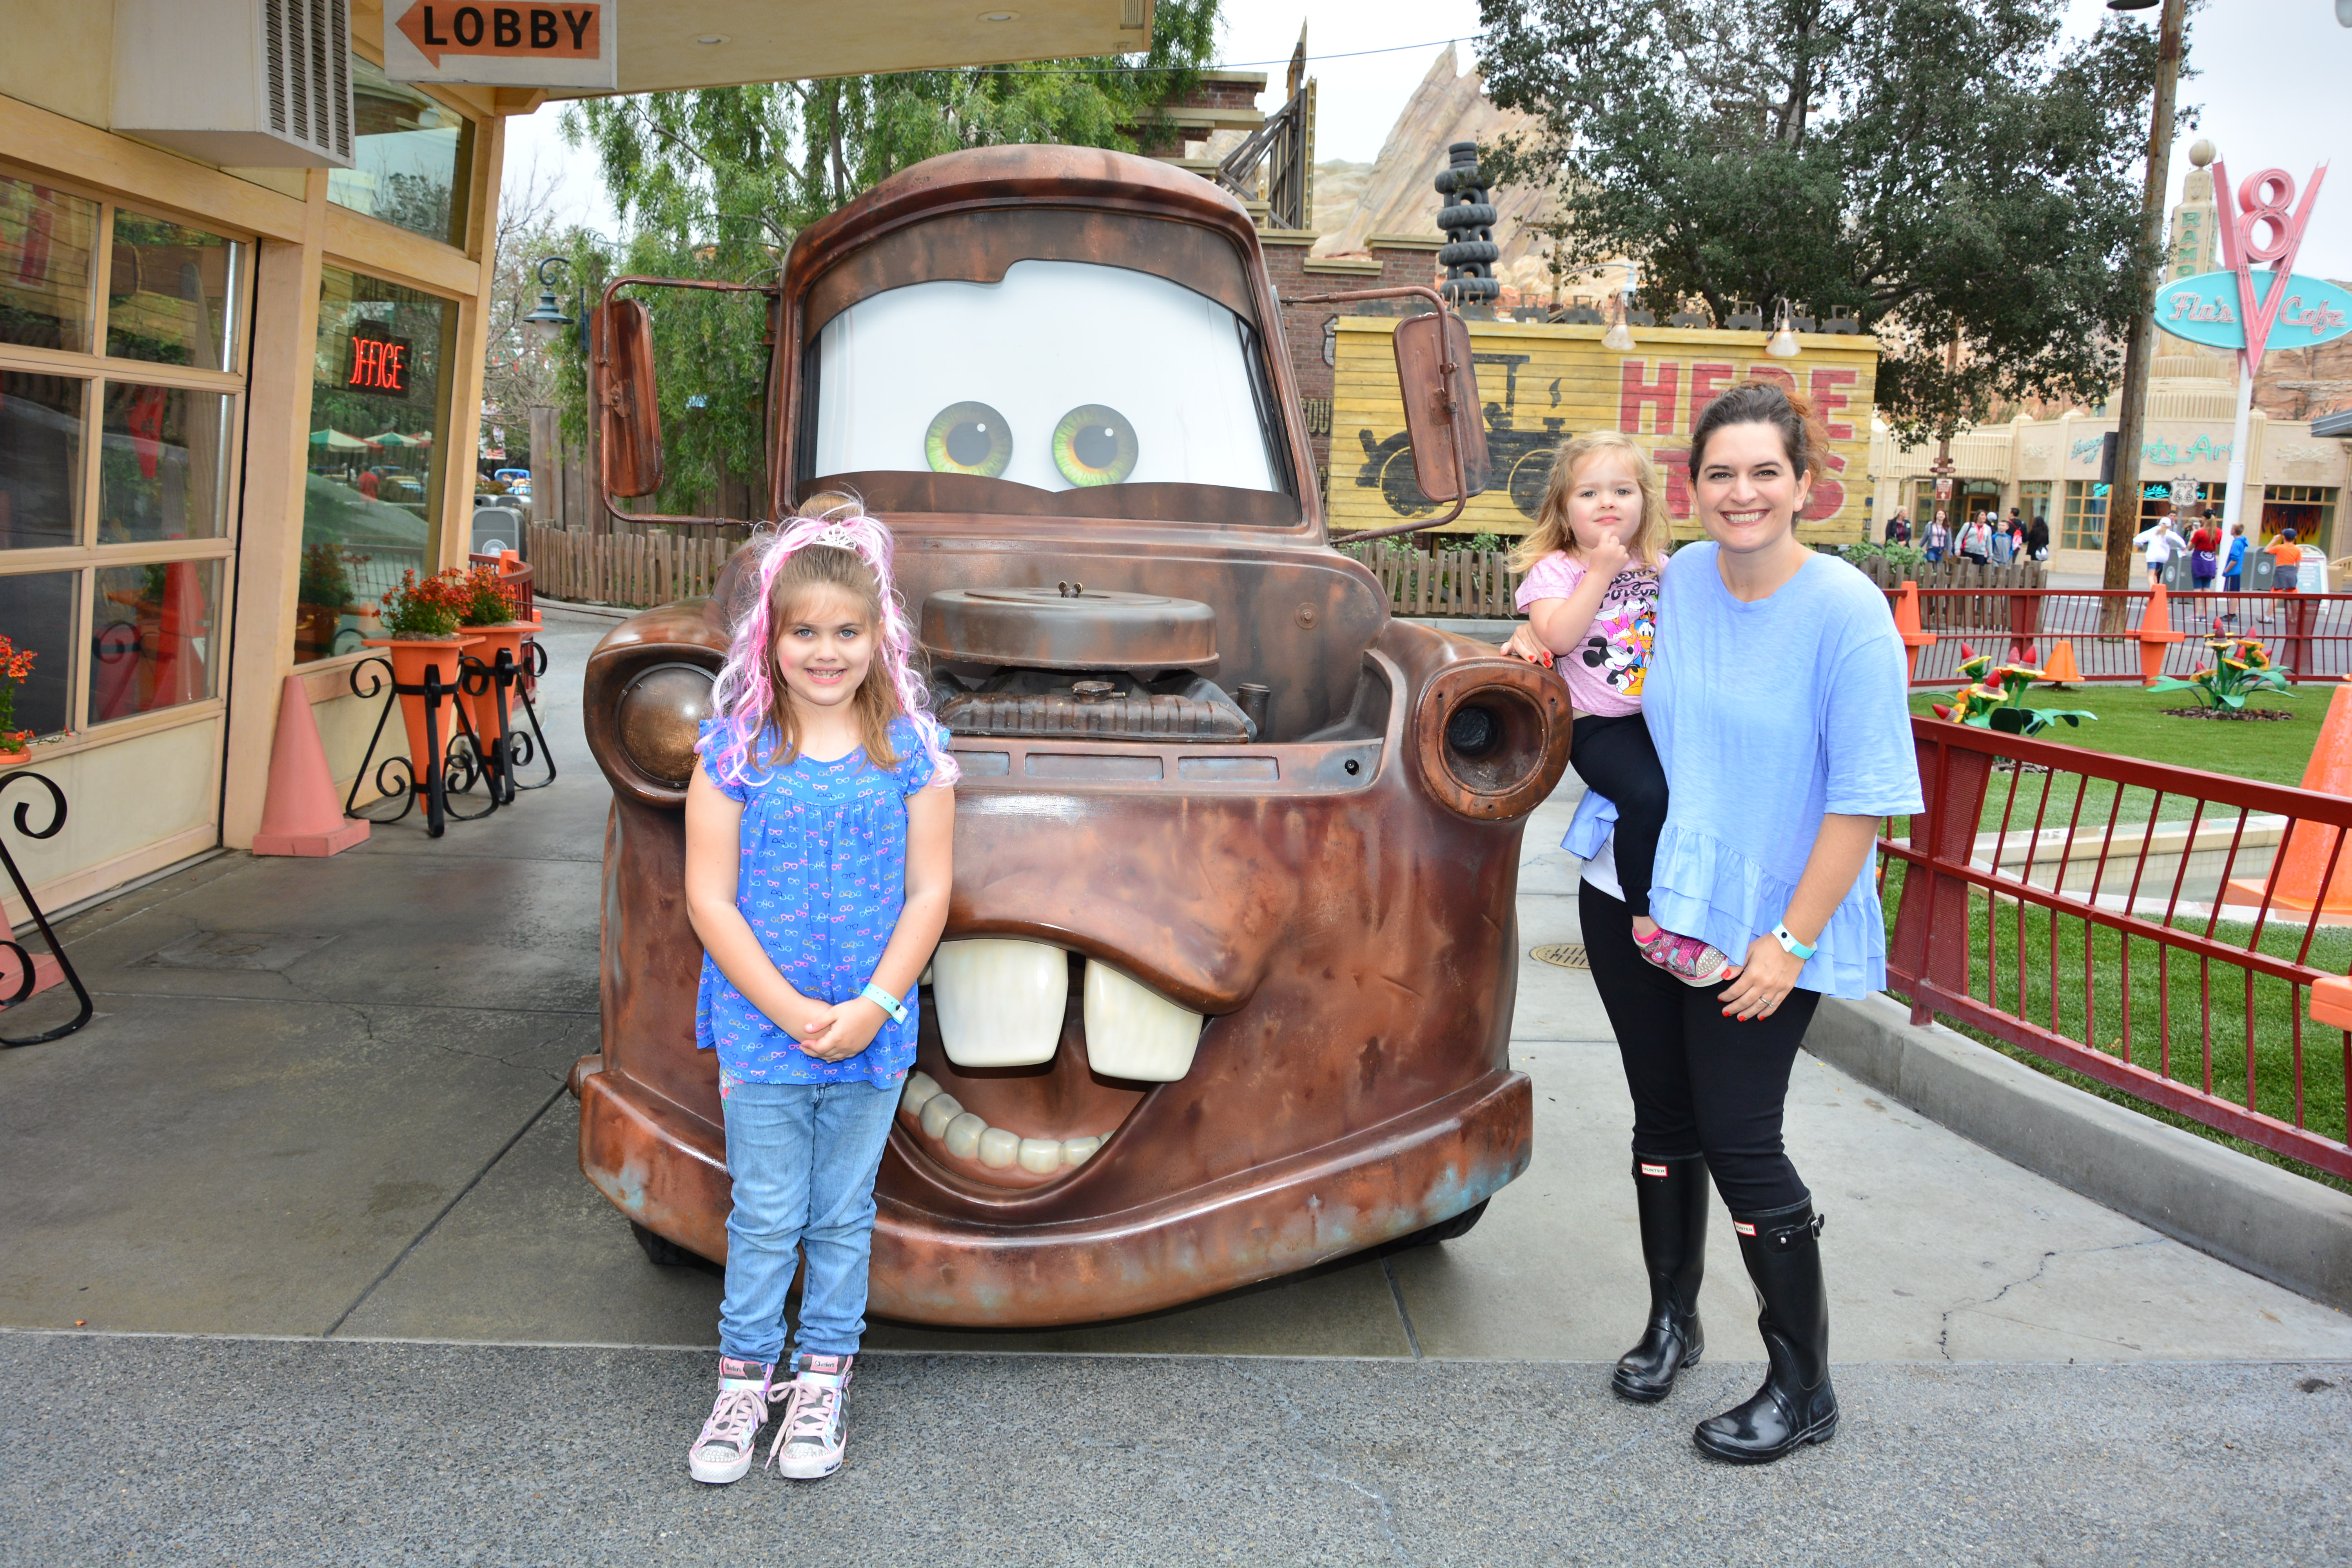 Planning a Disneyland vacation with preschoolers in tow? Learn how to do Disneyland with Preschoolers from a California native.